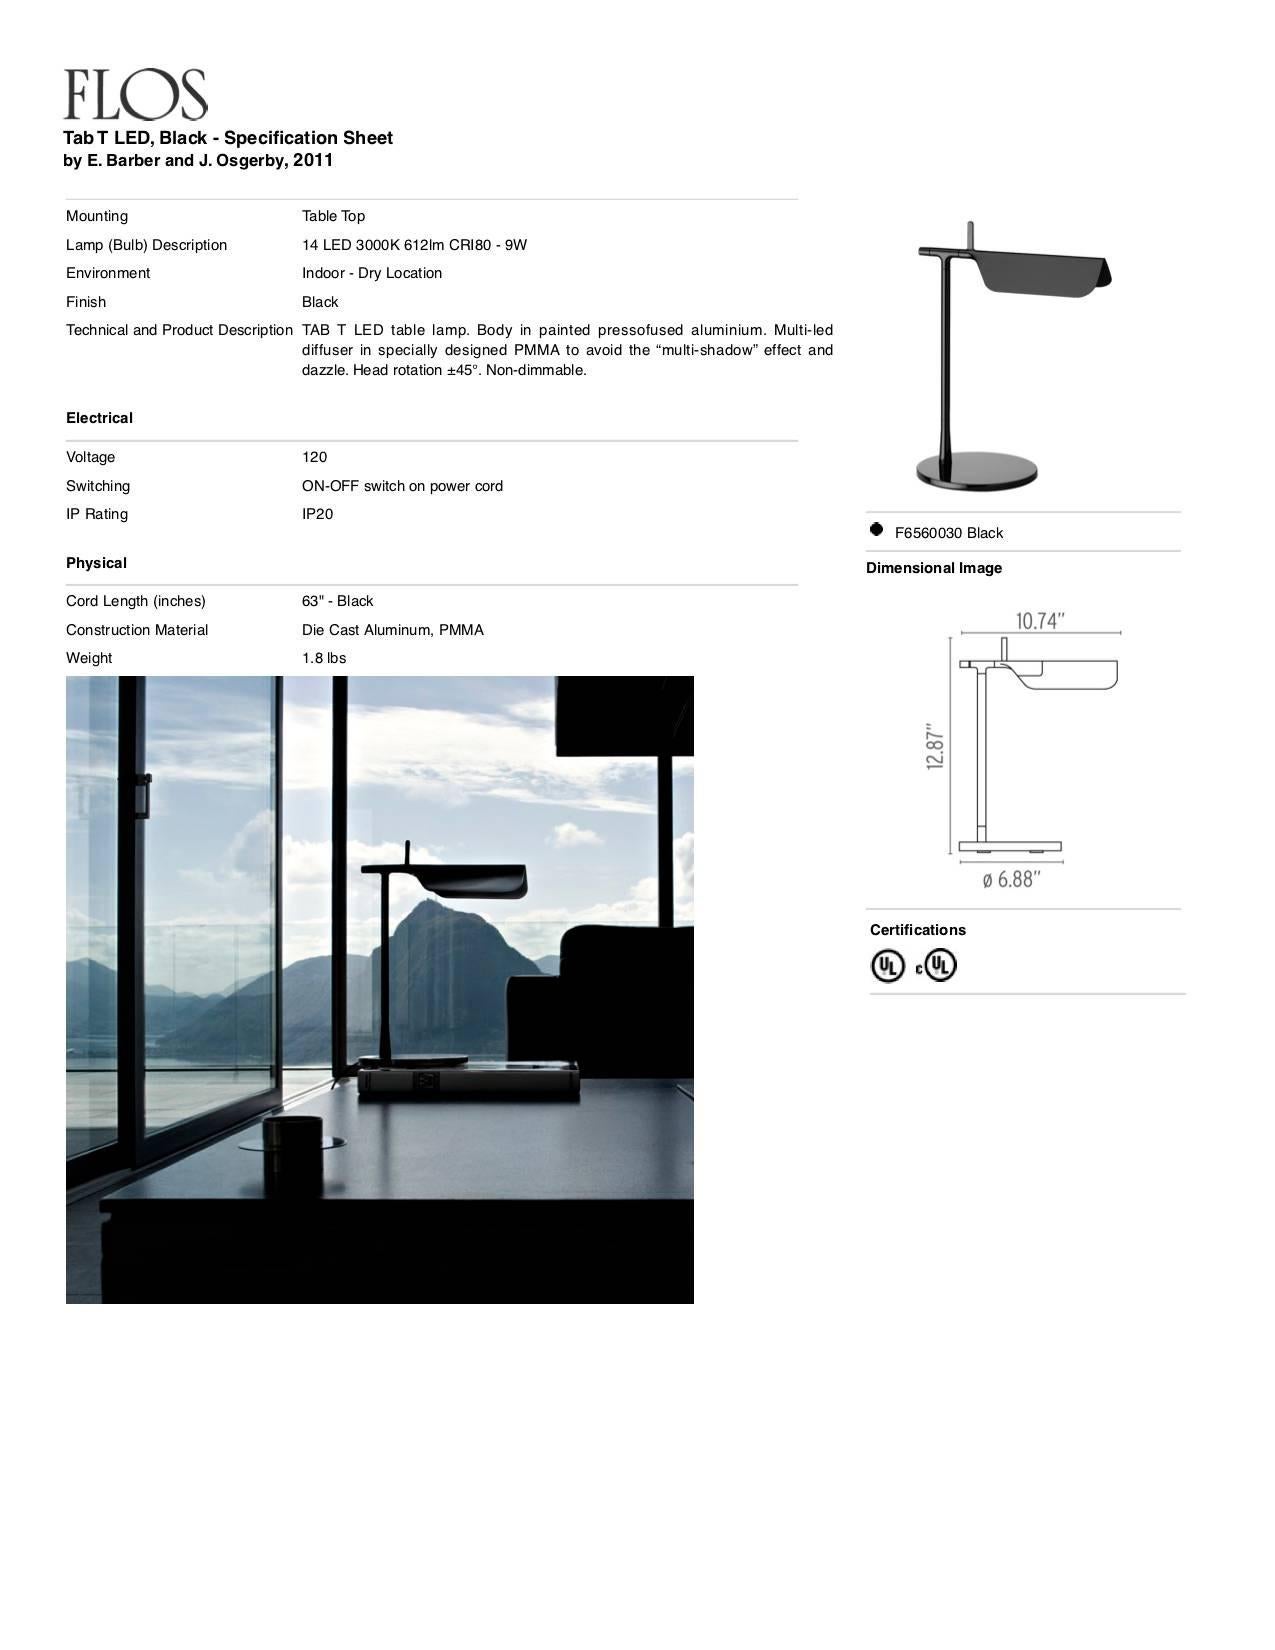 Contemporary FLOS Tab LED Table Lamp in Black by E. Barber & J. Osgerby